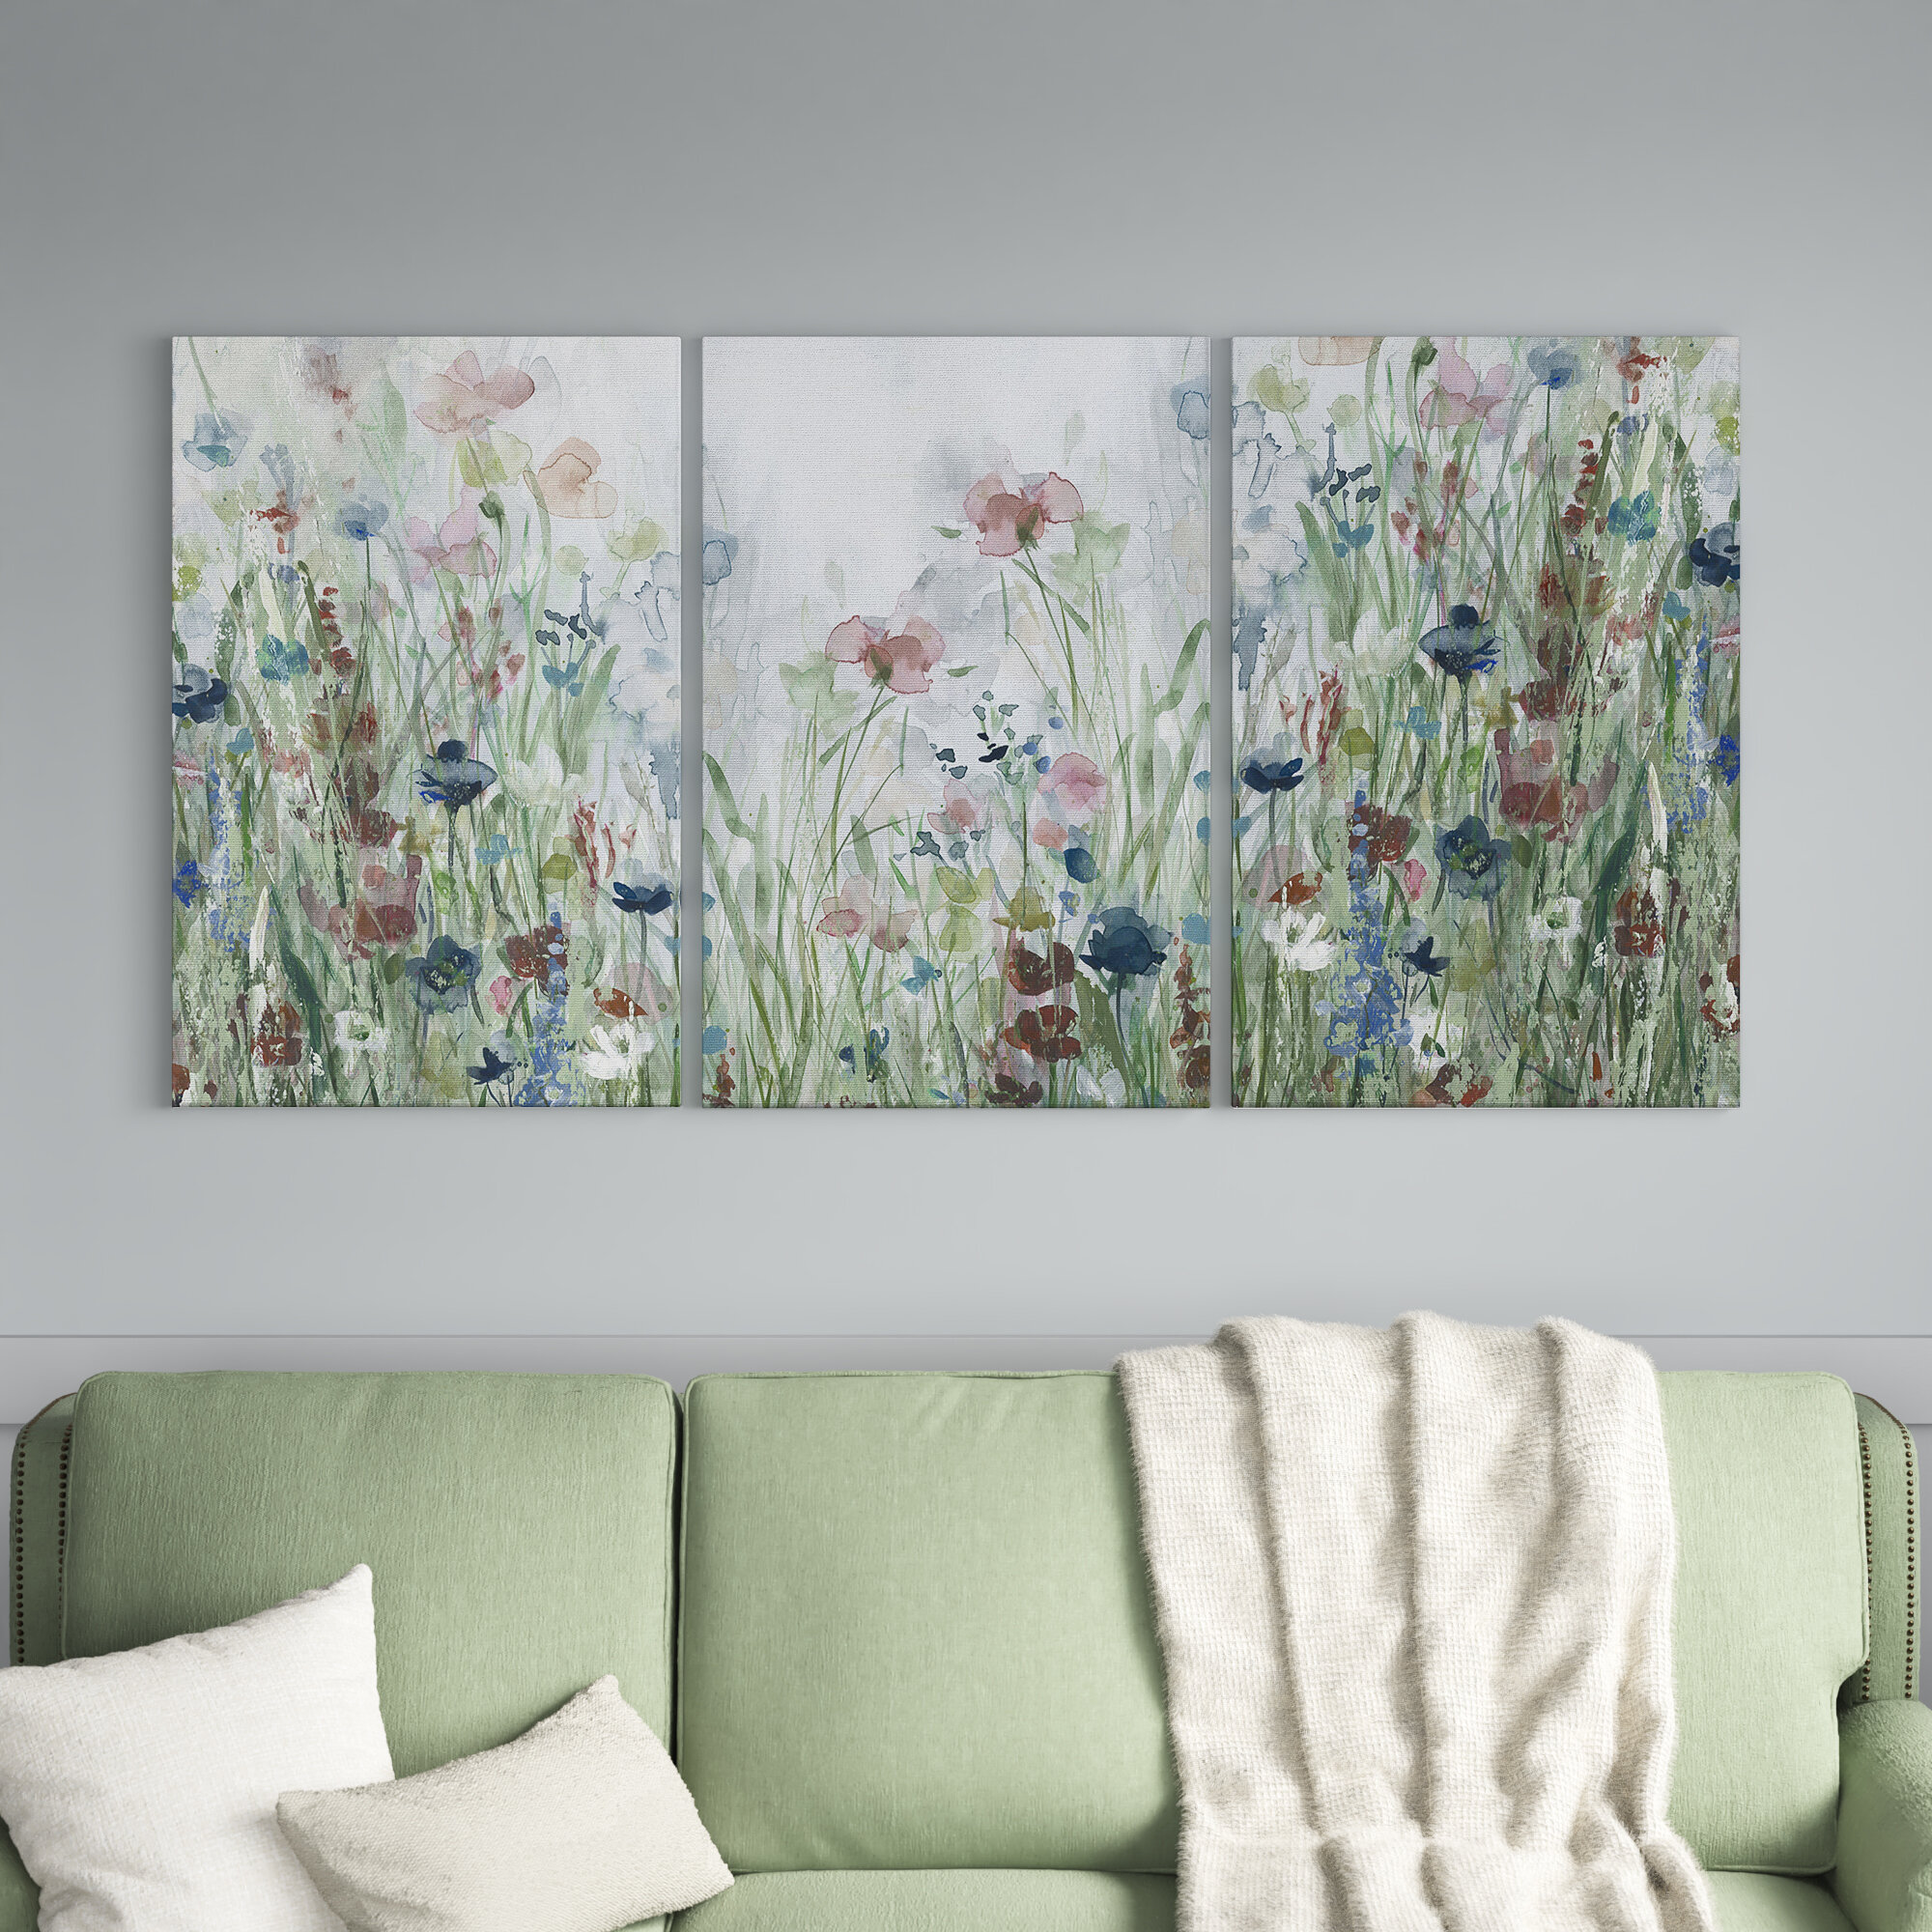 Wildflower Fields - 3 Piece Picture Frame Multi-Piece Image On Canvas Lark Manor Overall Size: 36 H x 72 W x 1 D